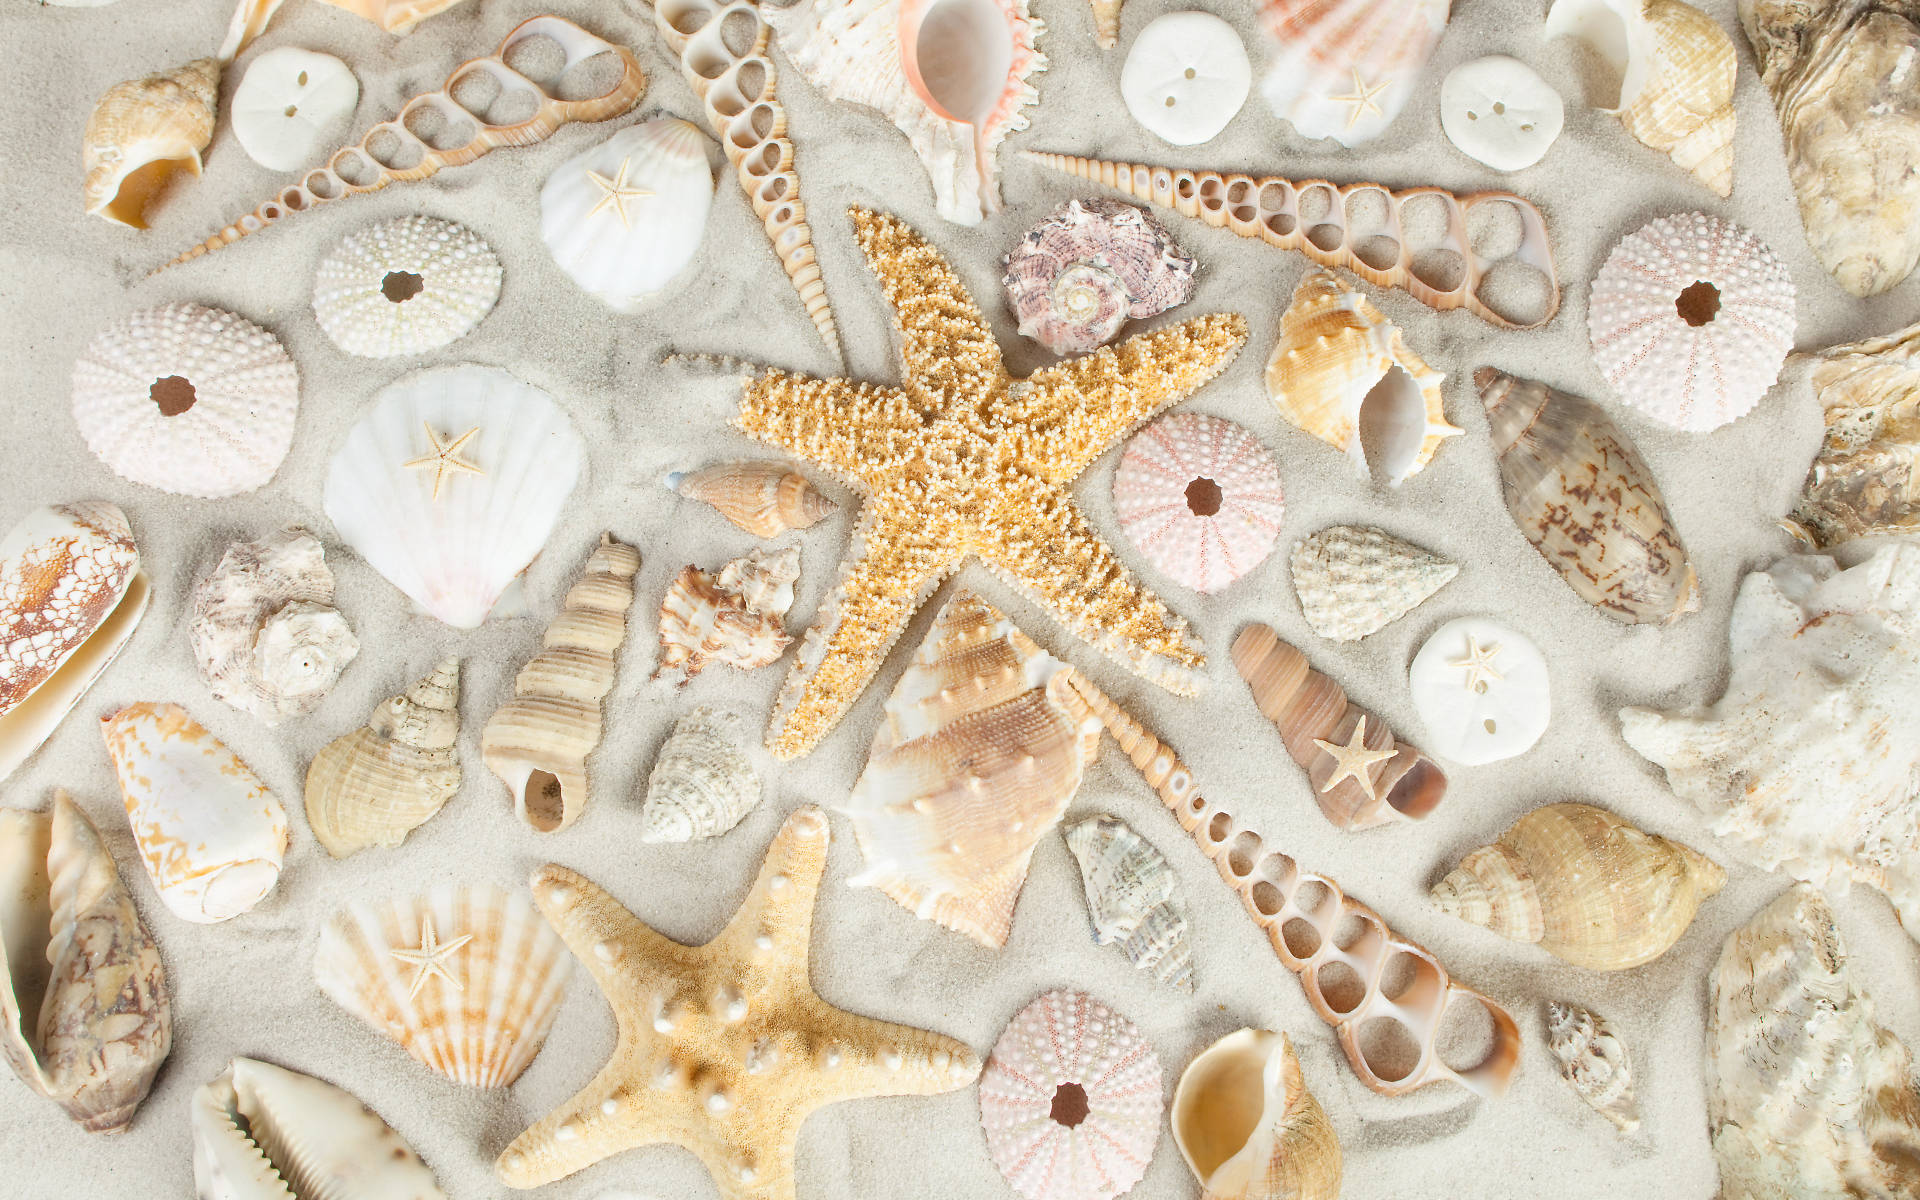 Download Shells And Starfish On White Sand Wallpaper